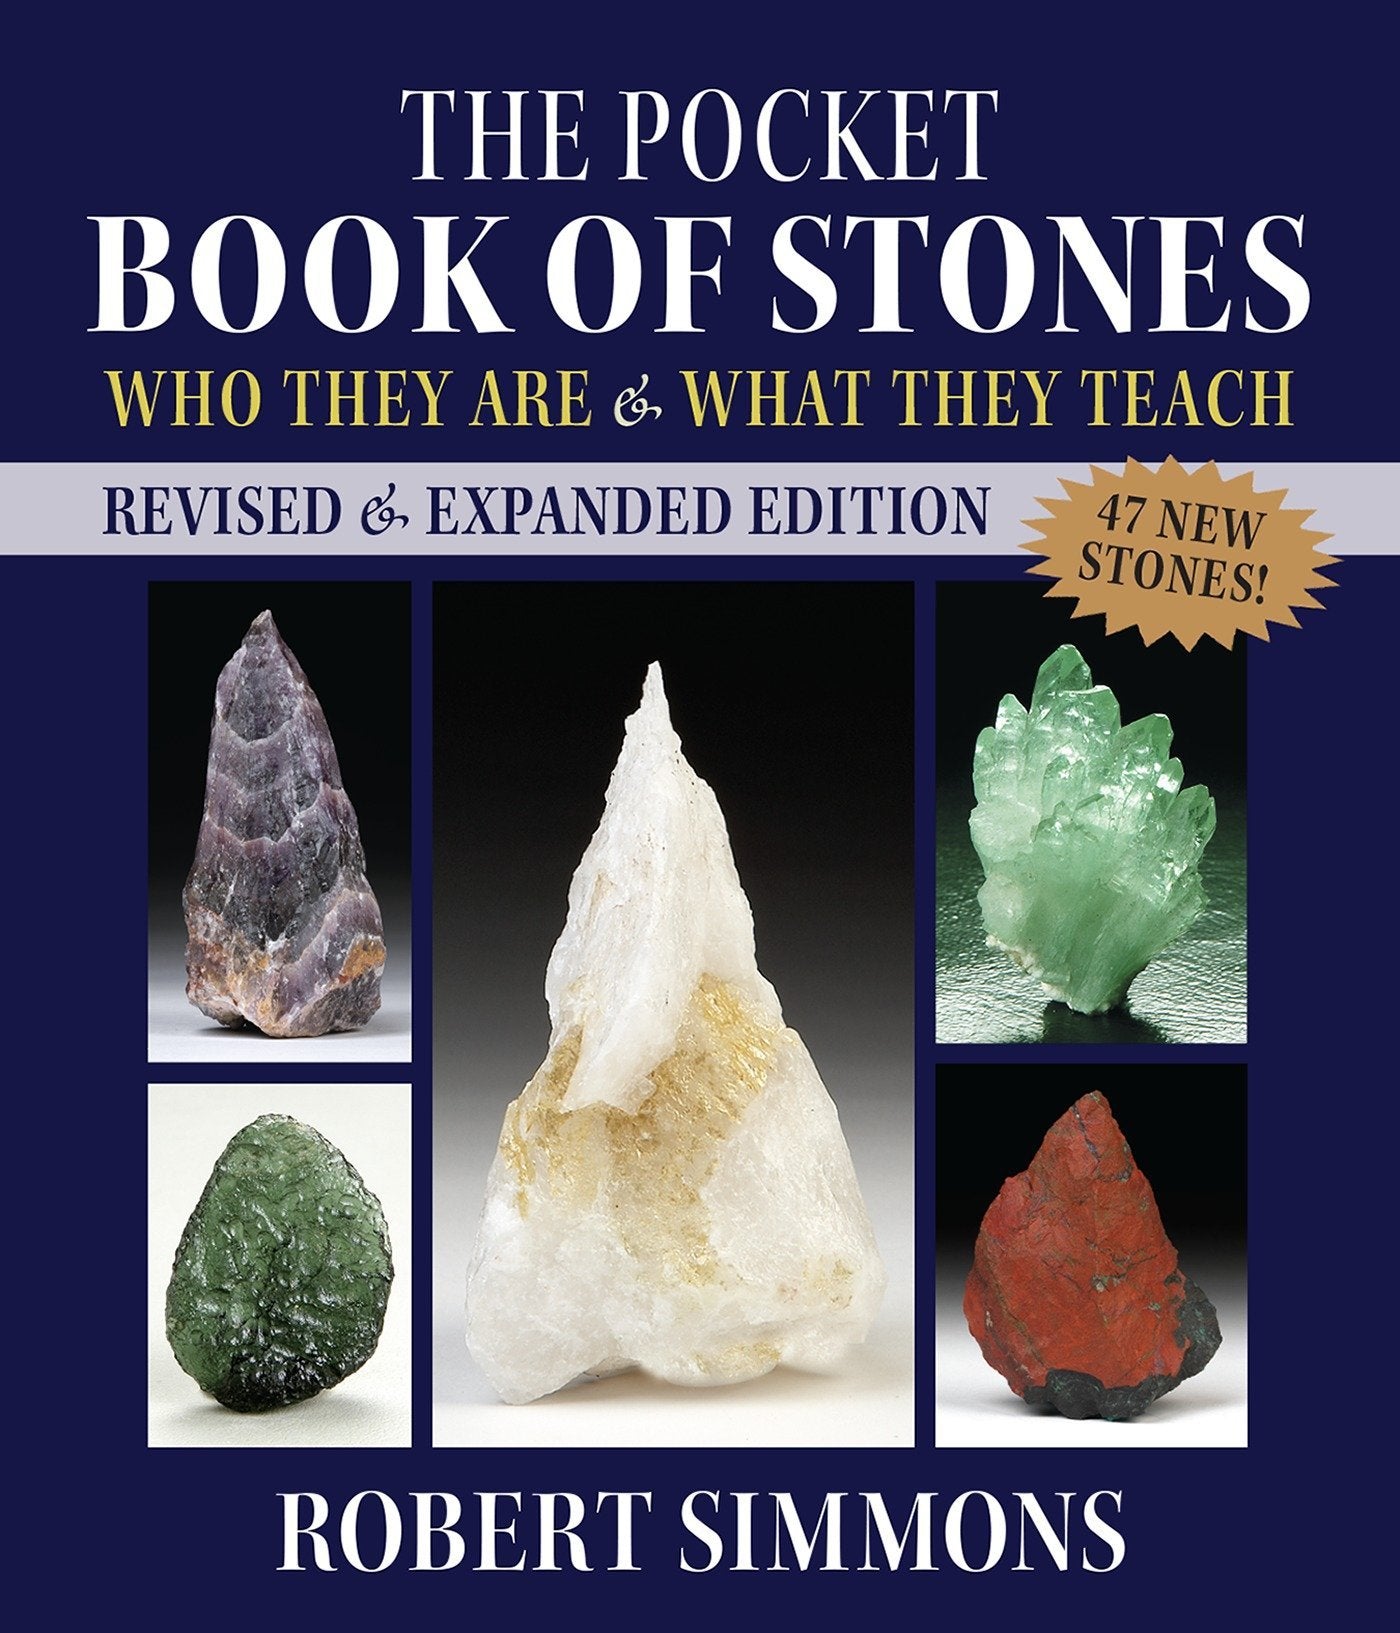 The Pocket Book of Stones: Who They Are and What They Teach || Robert Simmons (Paperback)